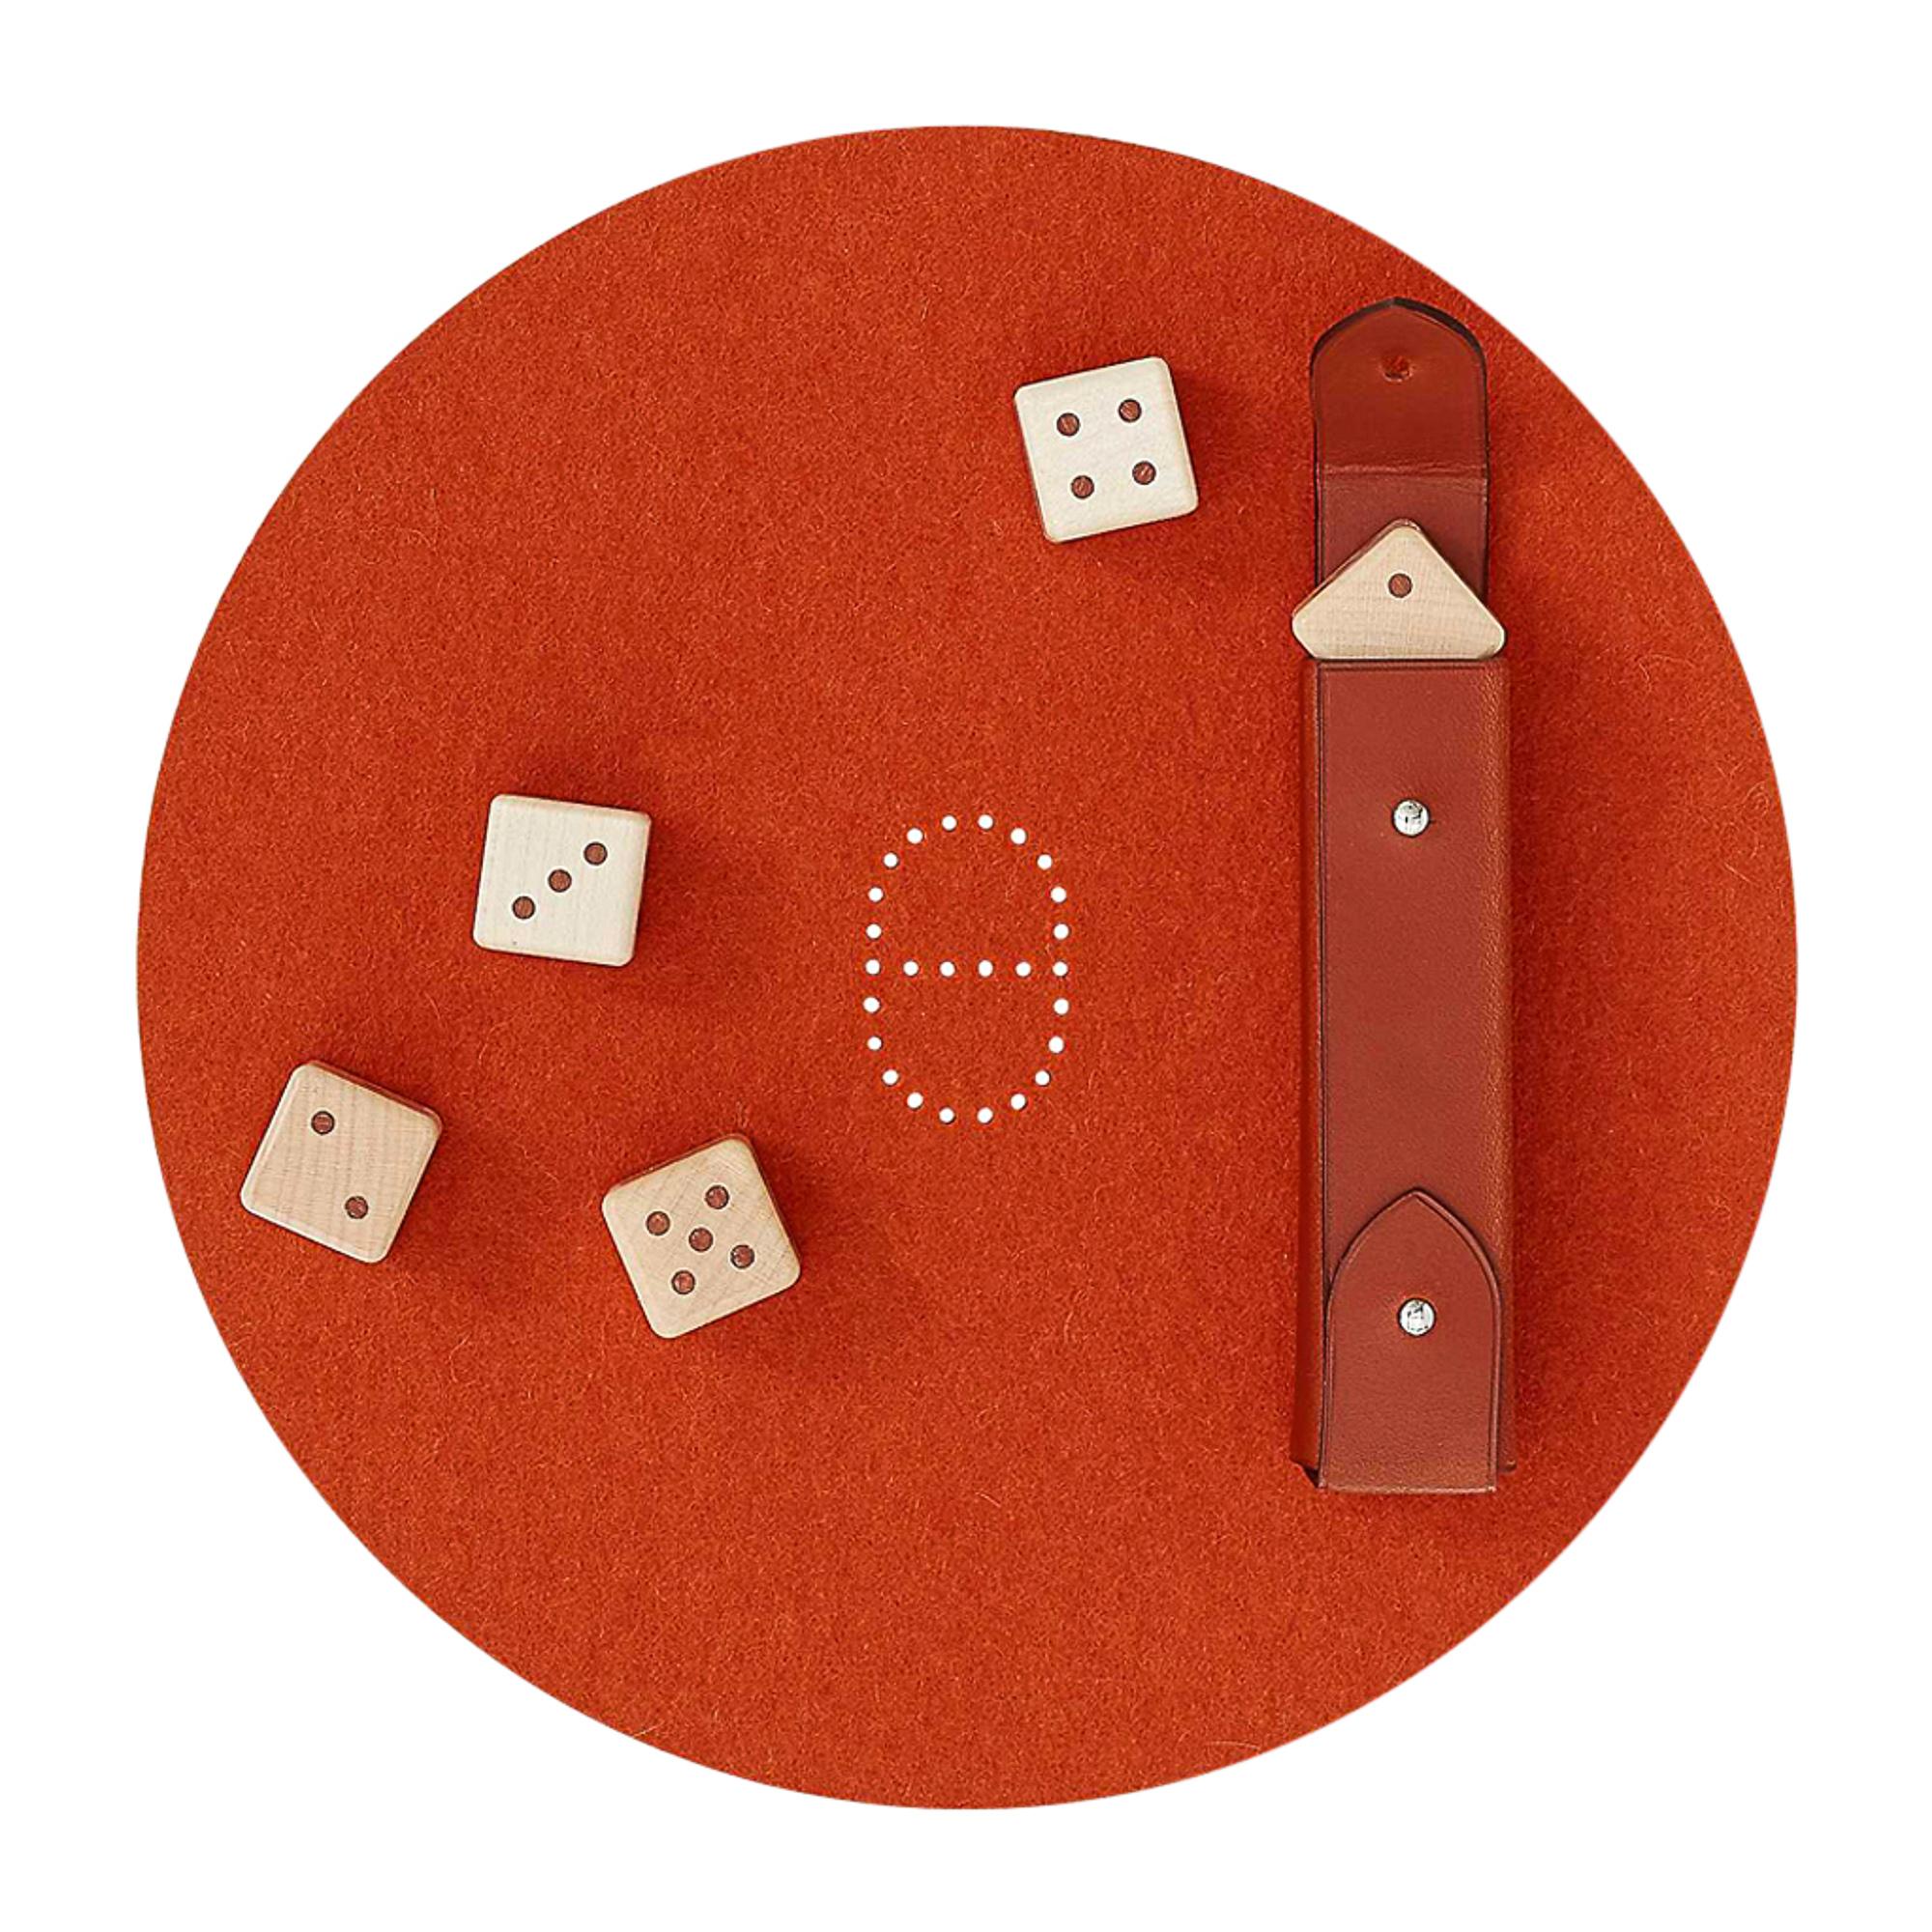 Mightychic offers an Hermes Declick Dice Game offered with a dash of luxury. 
Flanged bridle leather case marked with a saddle nail.
Maple marquetry dice. 
Rich Brique wool felt rug with Ancre perforated center.
Set includes score pad.
Comes with